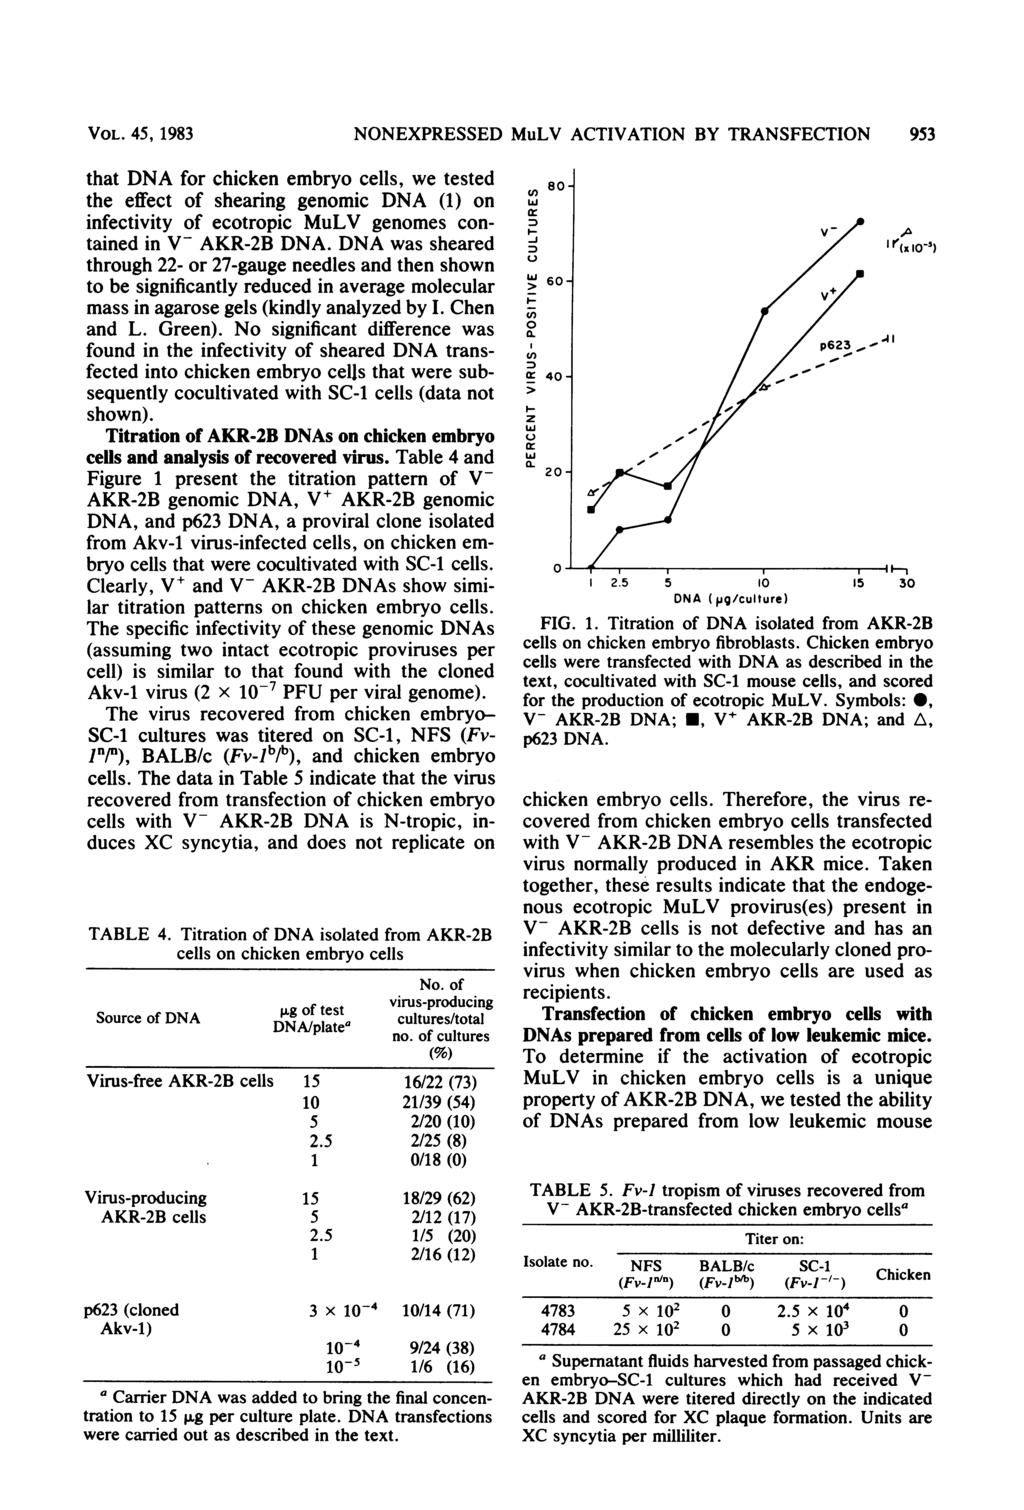 VOL. 45, 1983 that DNA for chicken embryo cells, we tested the effect of shearing genomic DNA (1) on infectivity of ecotropic MuLV genomes contained in V- AKR-2B DNA.